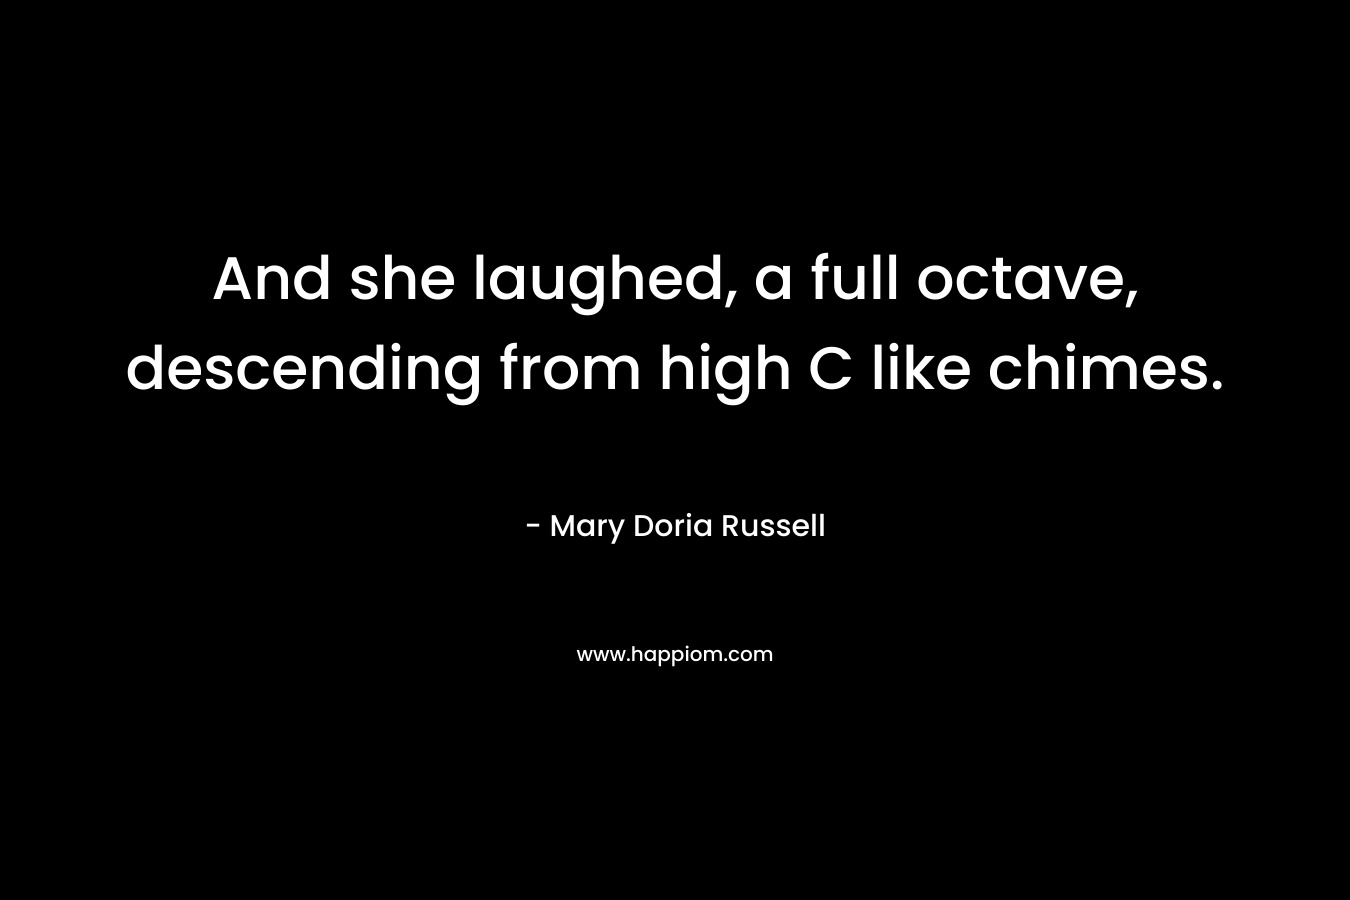 And she laughed, a full octave, descending from high C like chimes. – Mary Doria Russell